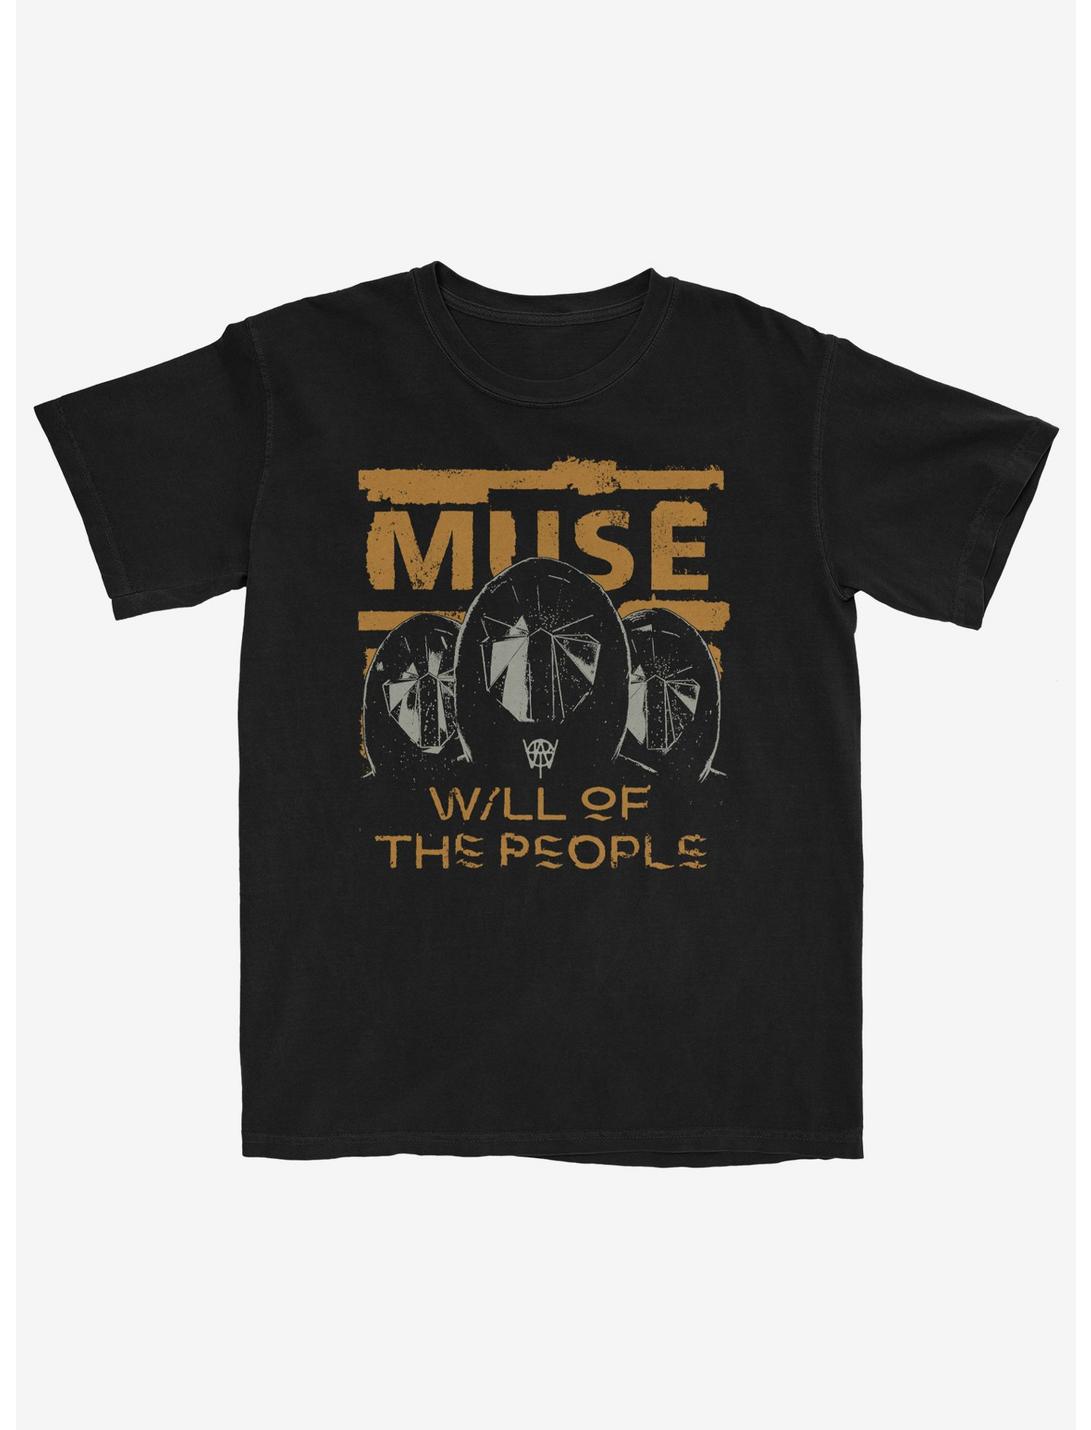 Muse Will Of The People Boyfriend Fit Girls T-Shirt, BLACK, hi-res